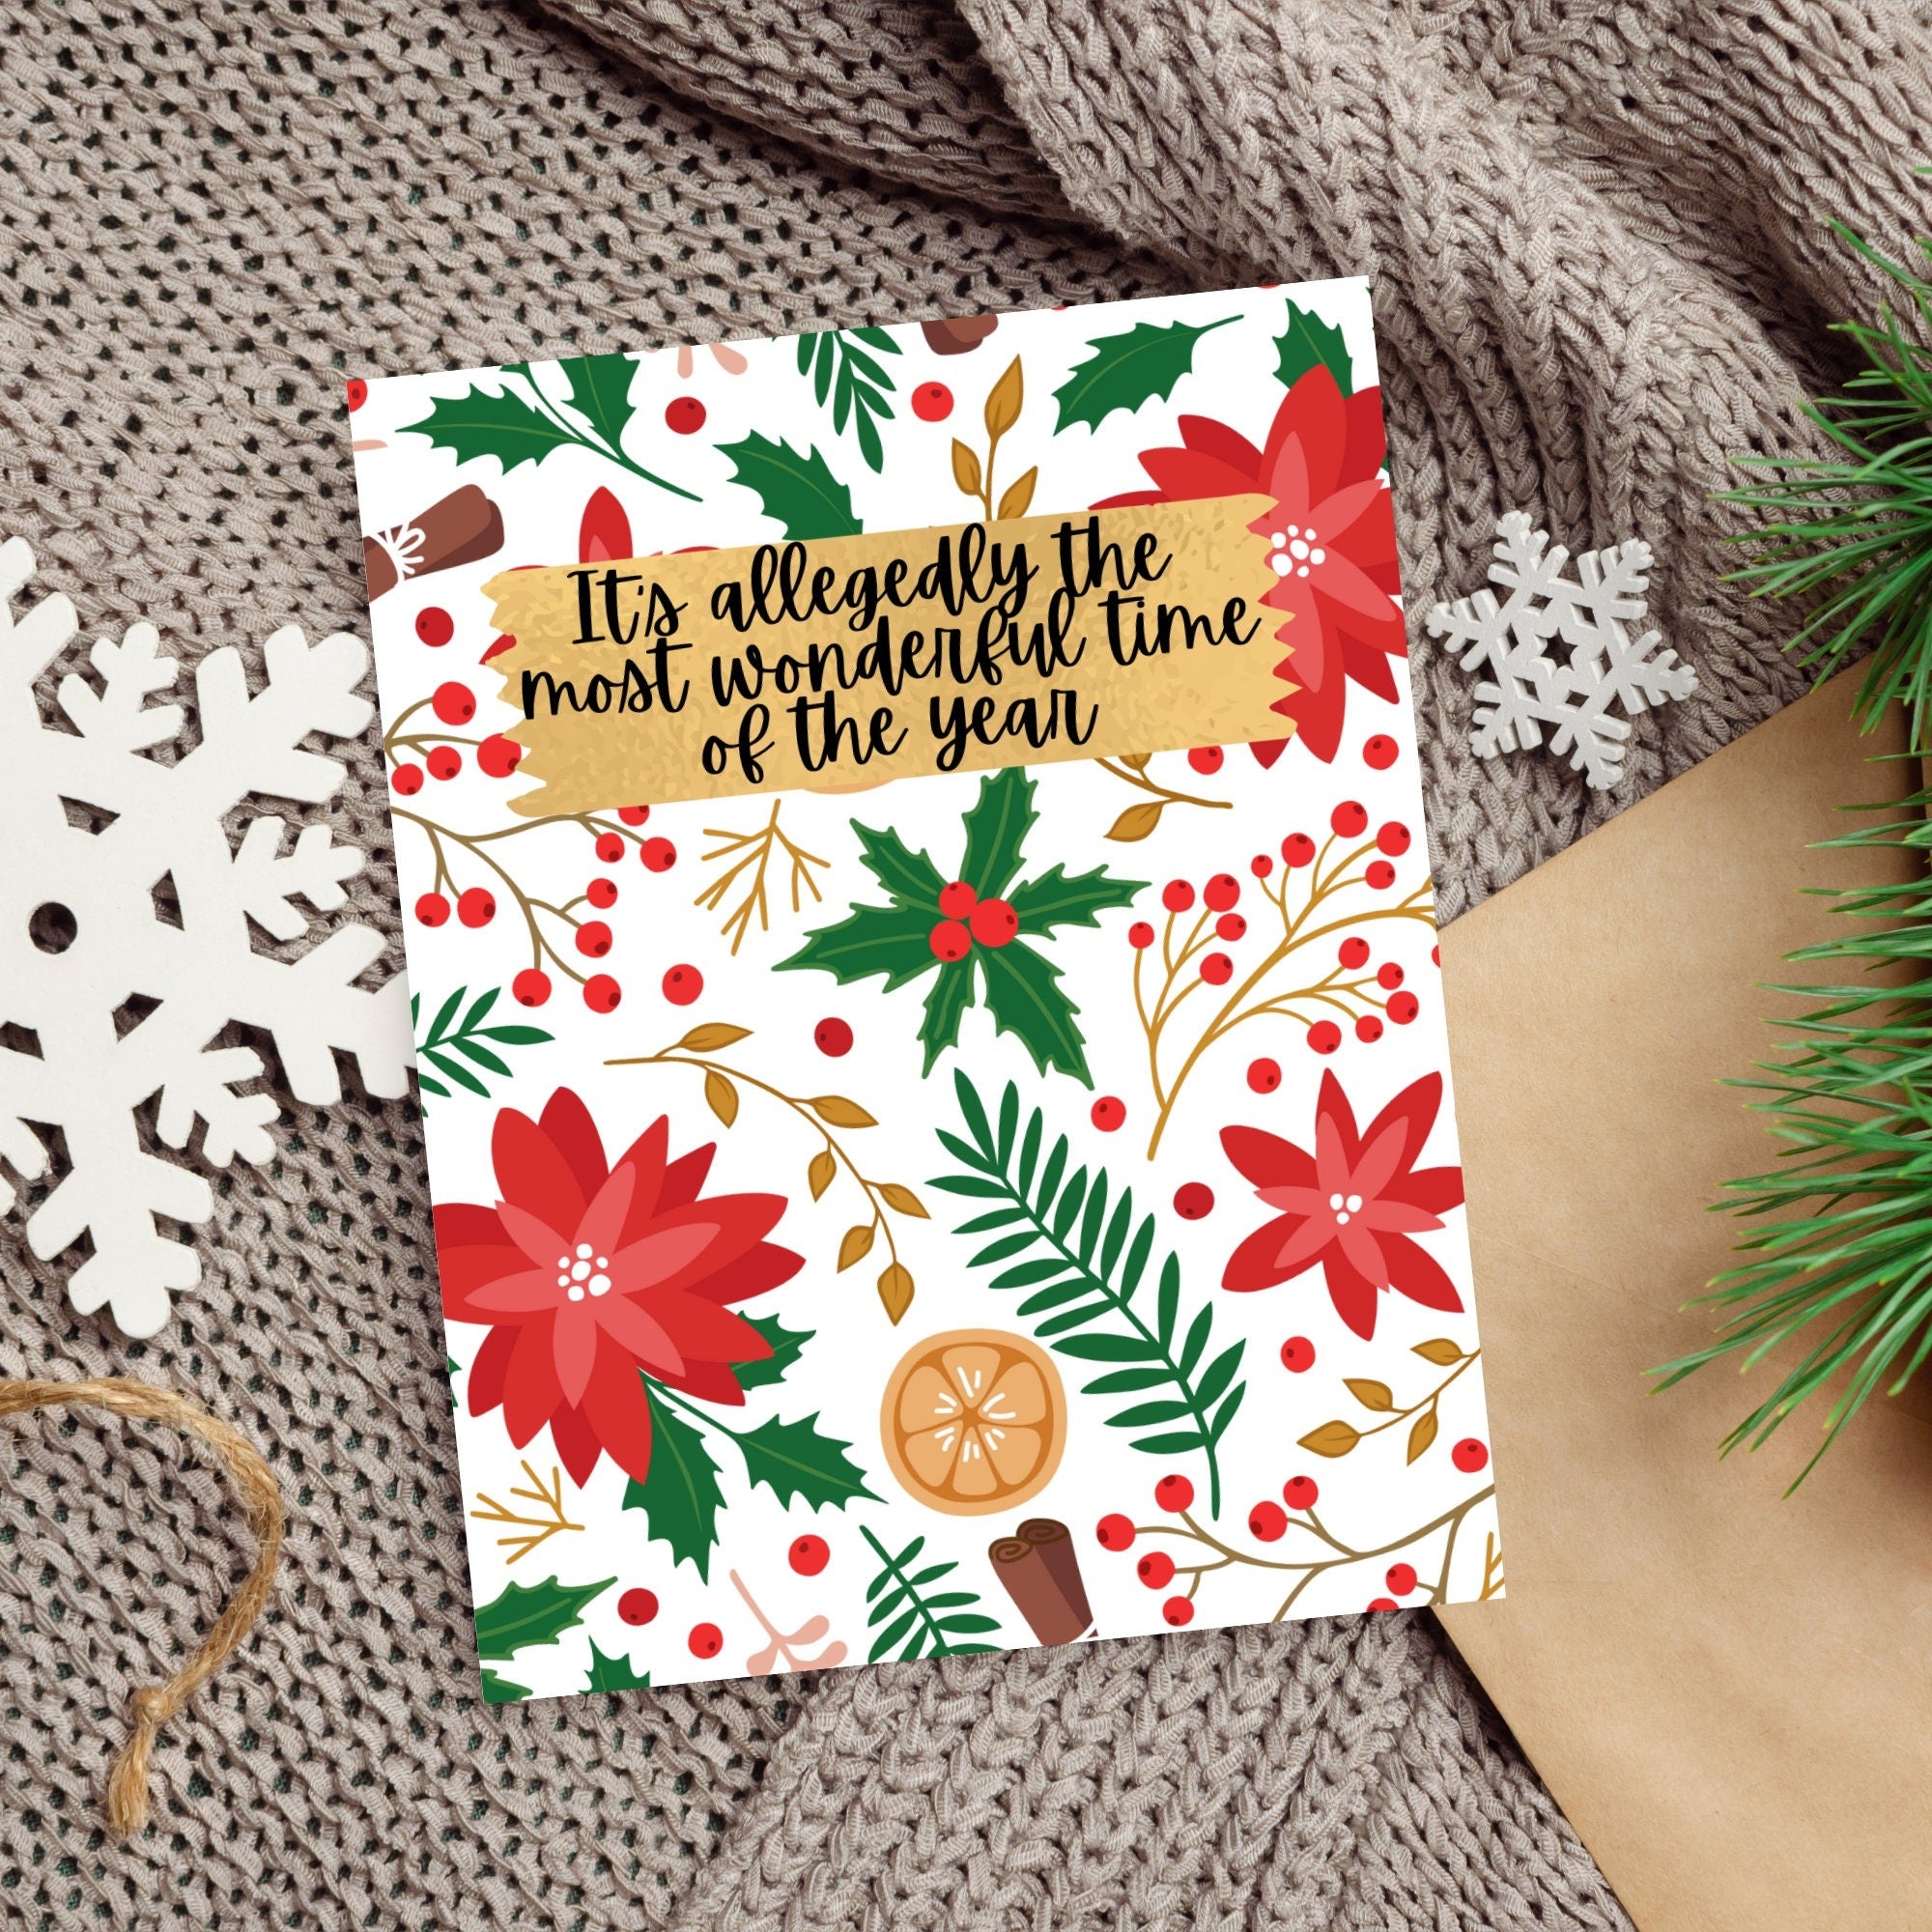 It's Allegedly The Most Wonderful Time Of The Year Card